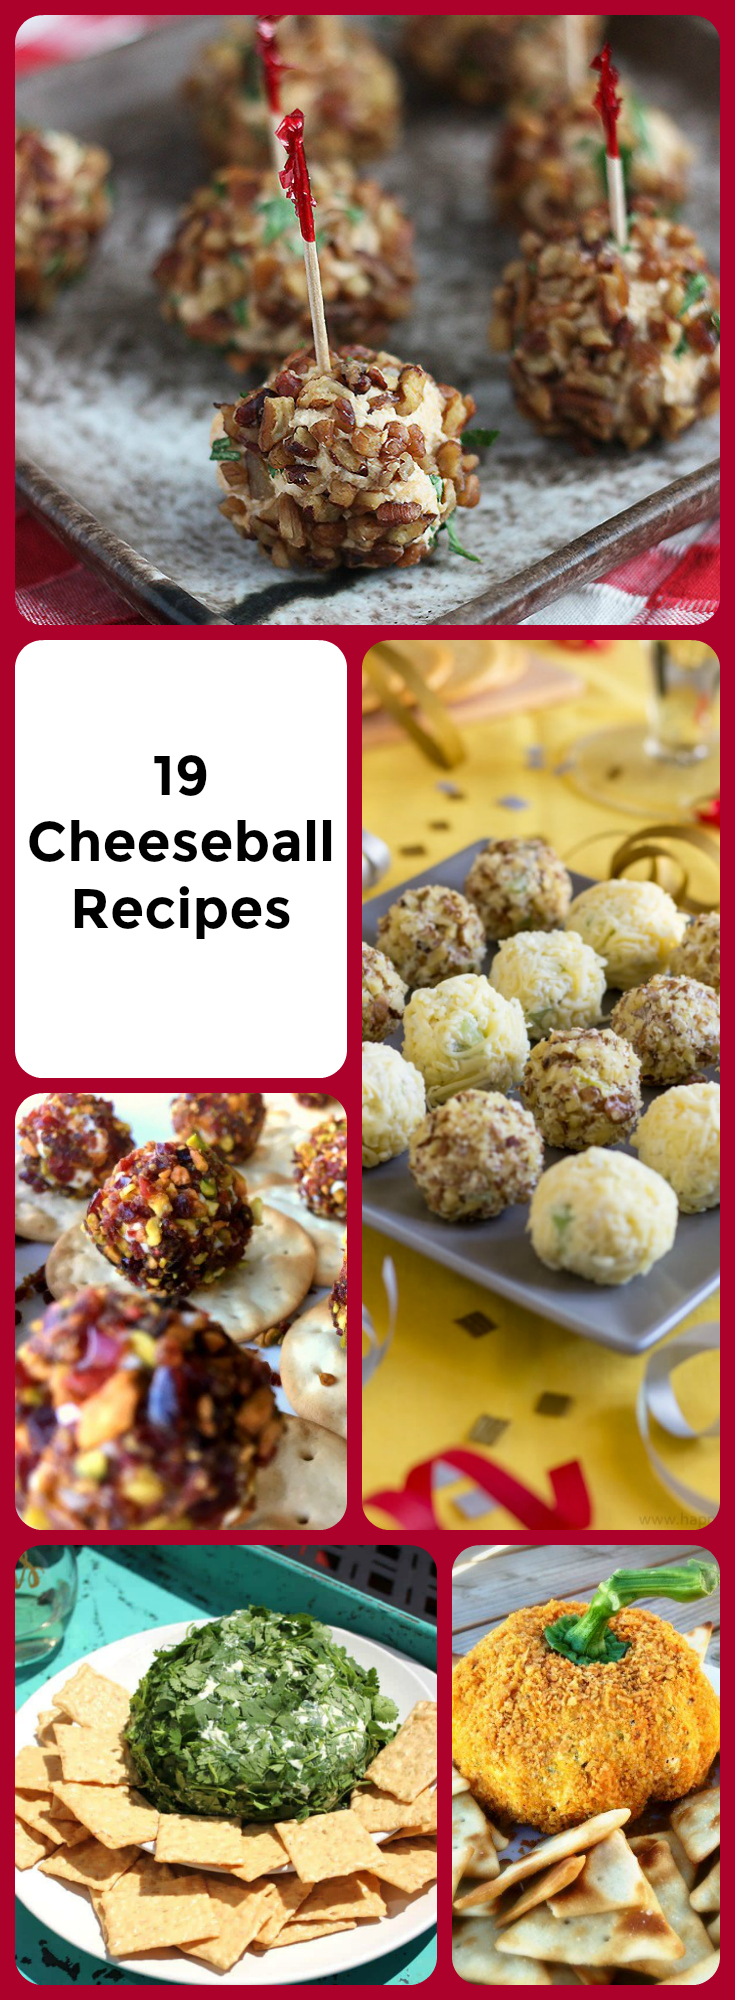 Try these easy cheese ball recipes that will rock your party! Which one will you try first? Check out my very favorite cheese ball recipe. I adore the creaminess and the blue cheese.